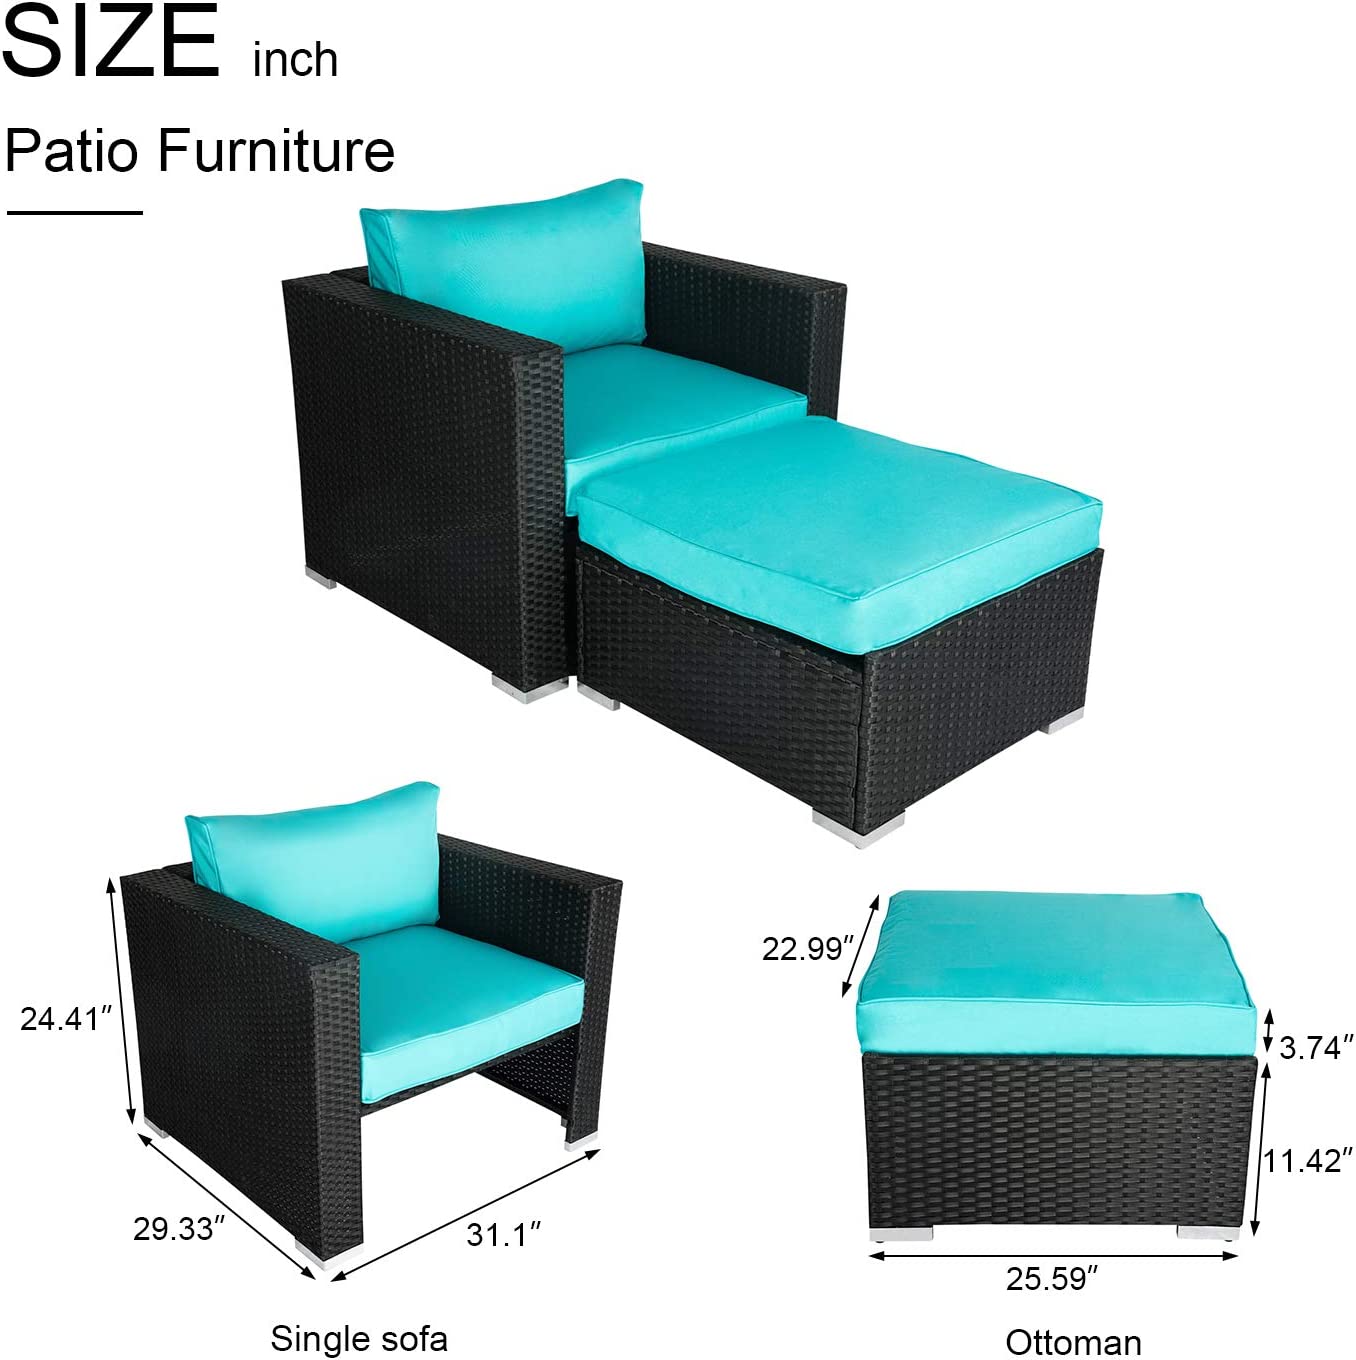 Kinbor 2pcs Outdoor Sofa Furniture PE Wicker Lounge Chair with Ottoman Sectional Conversation Set, Wicker Patio Sofa Sets, Blue - image 2 of 7